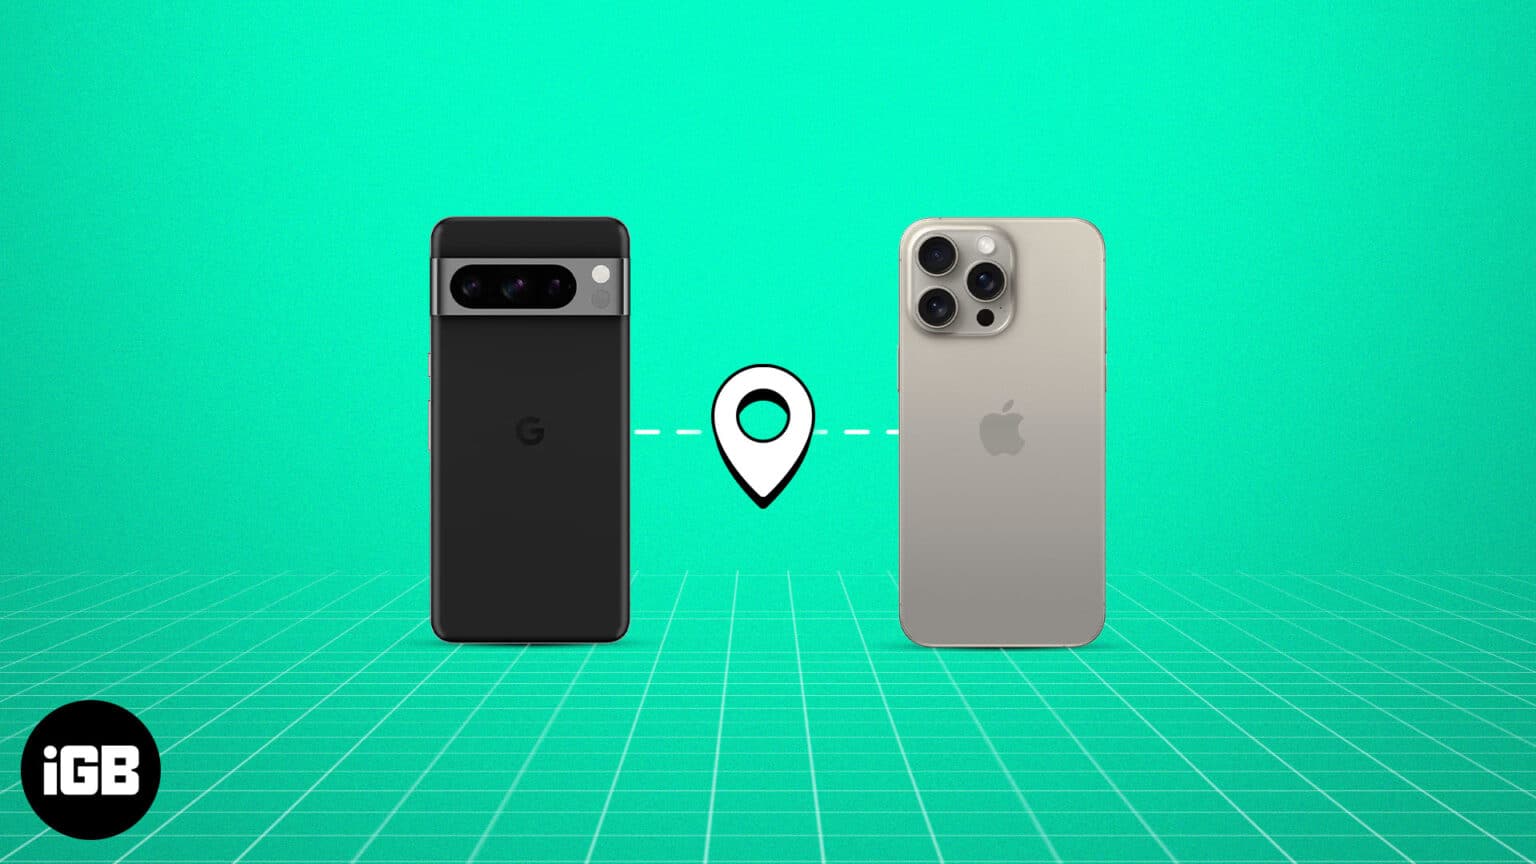 How to track iPhone from Android phone